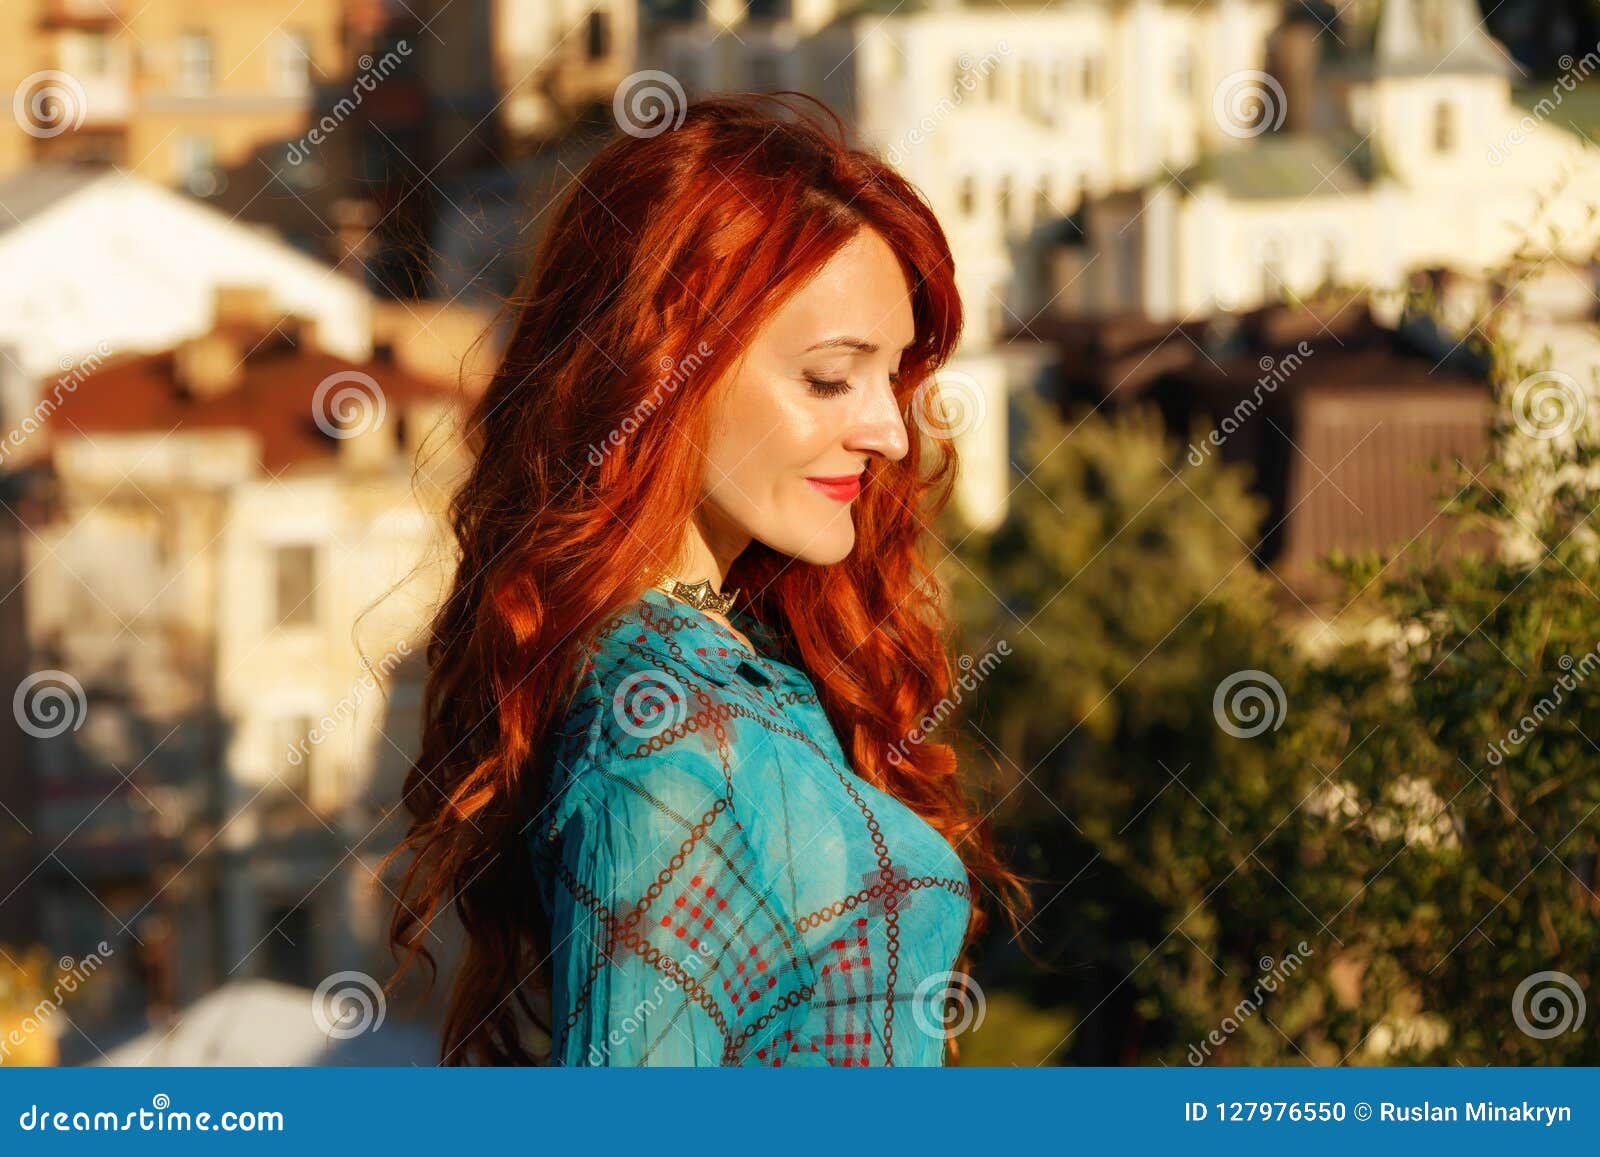 red hair and birch